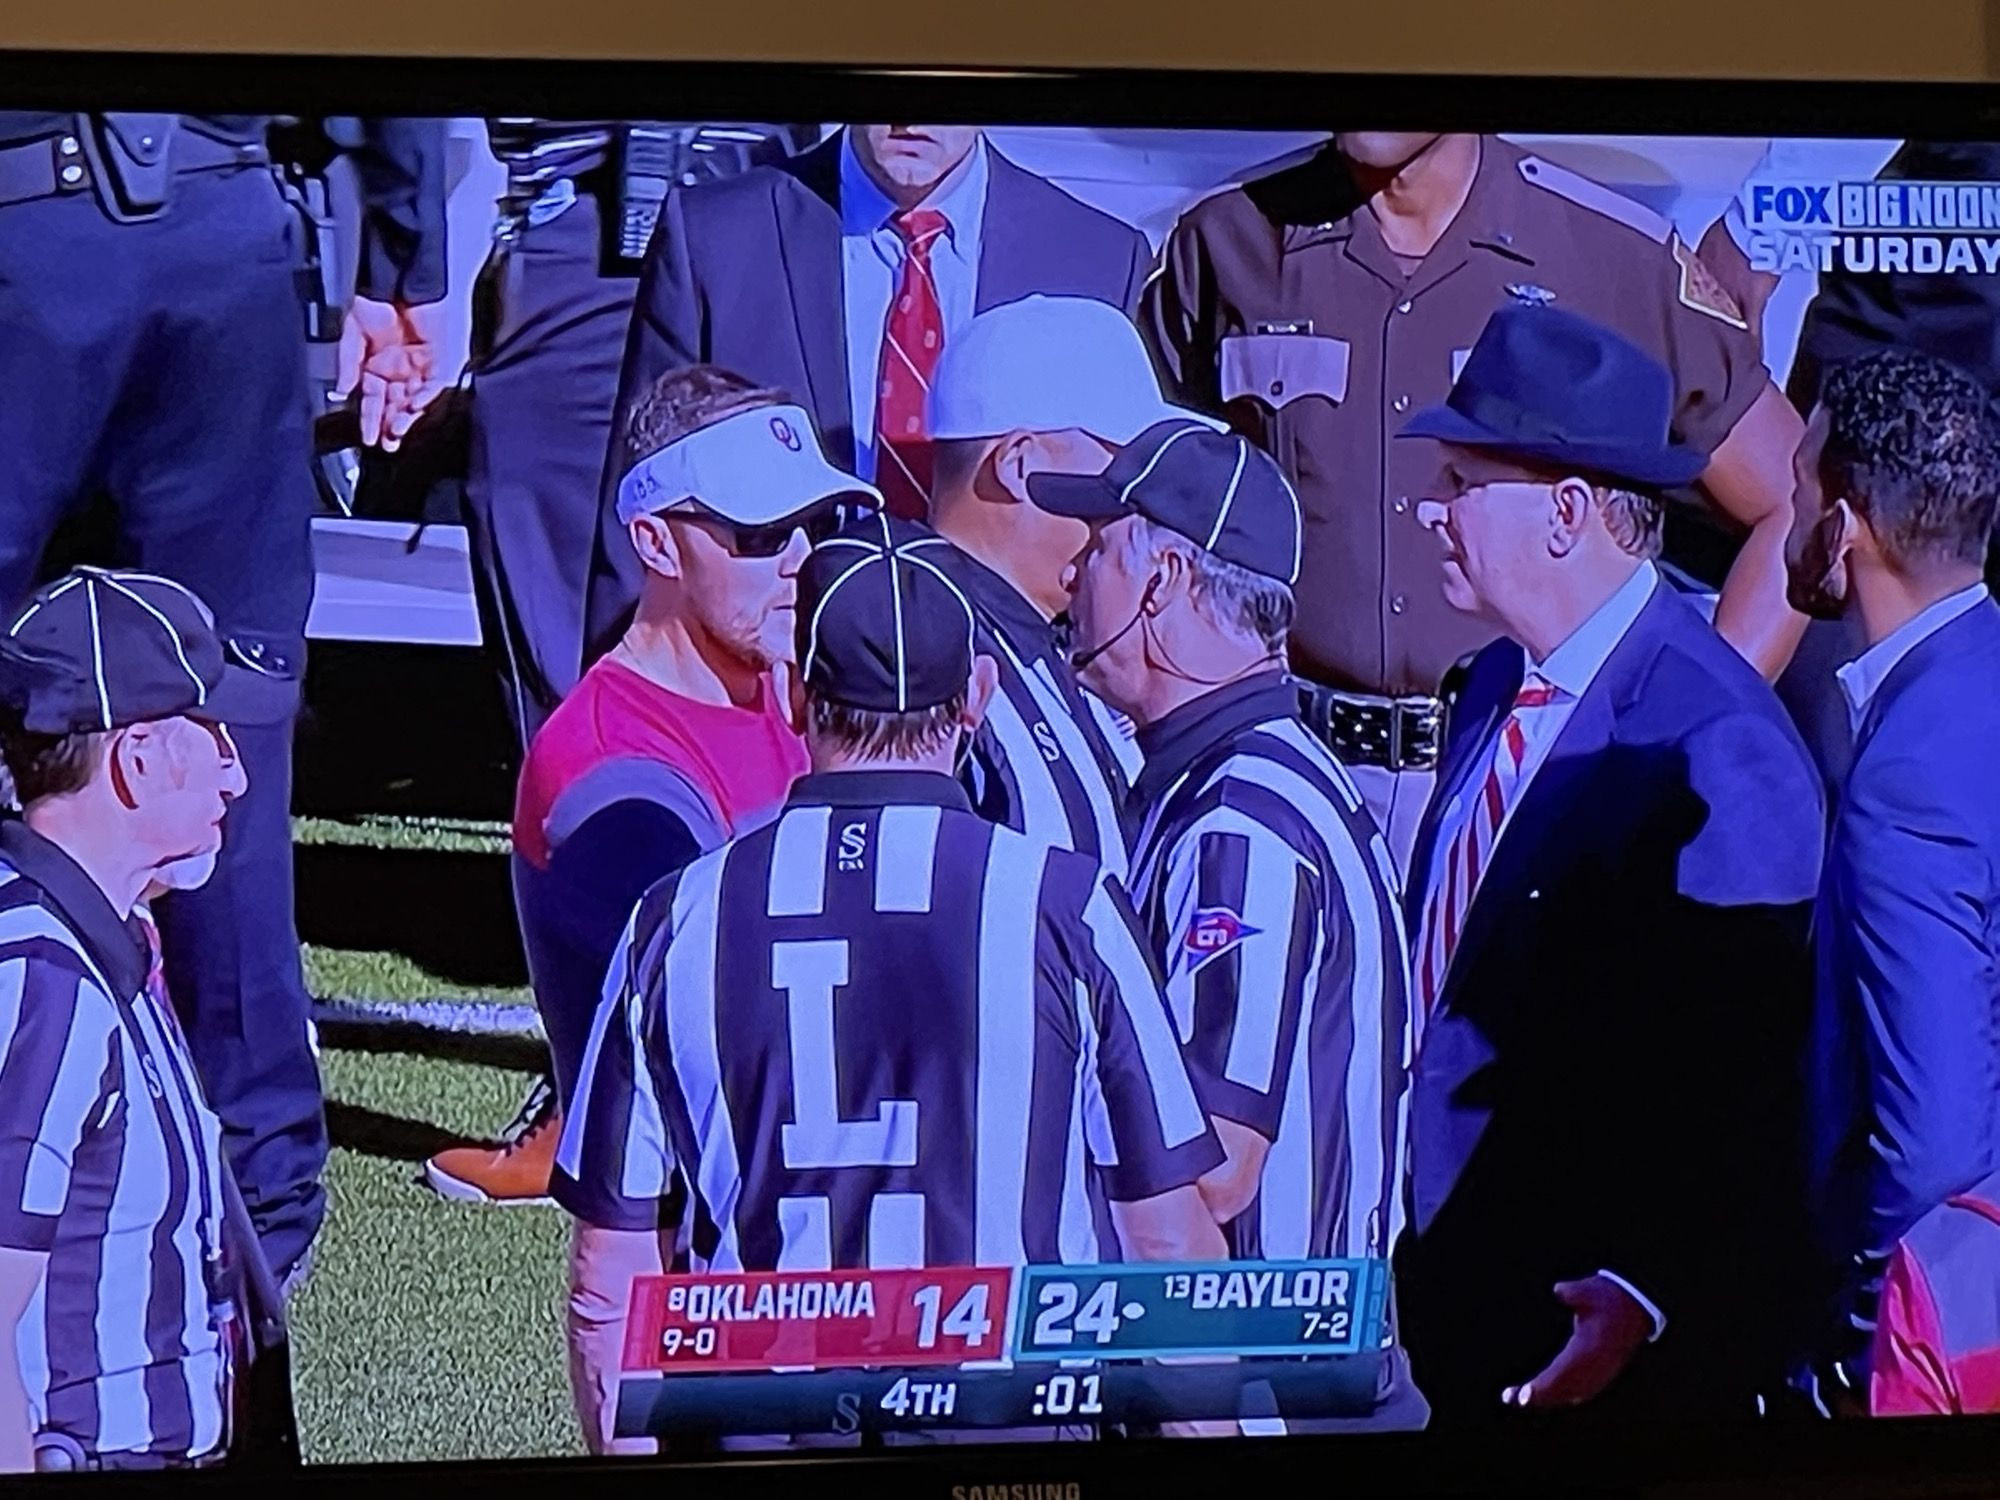 Something so serious happened in the Oklahoma / Baylor game that an old timey detective came out